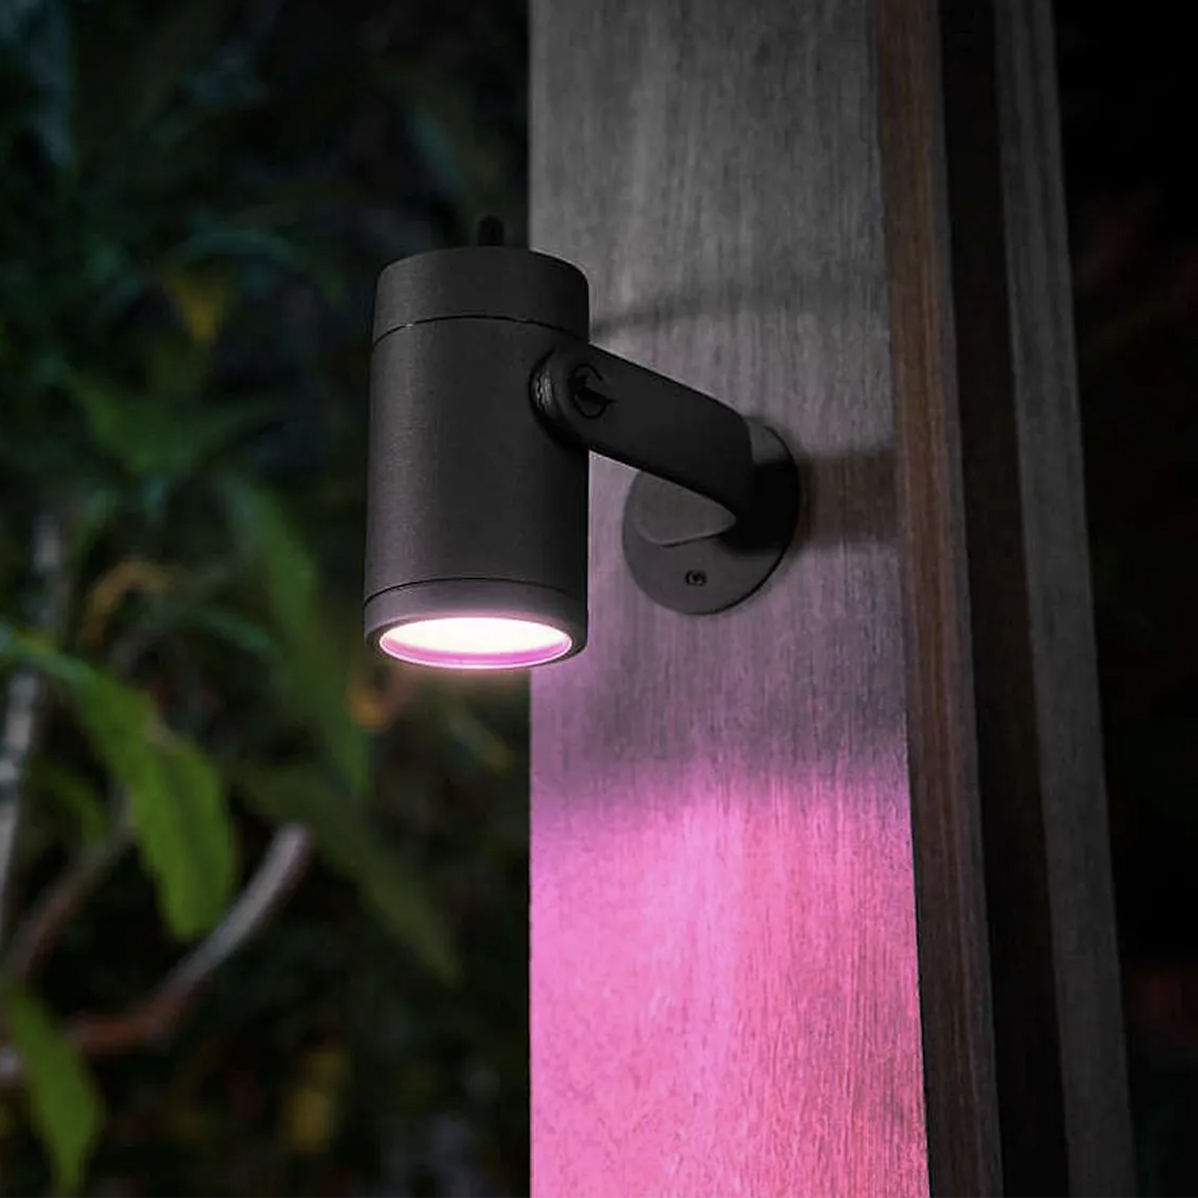 Philips Hue light outside in garden at night with pink light